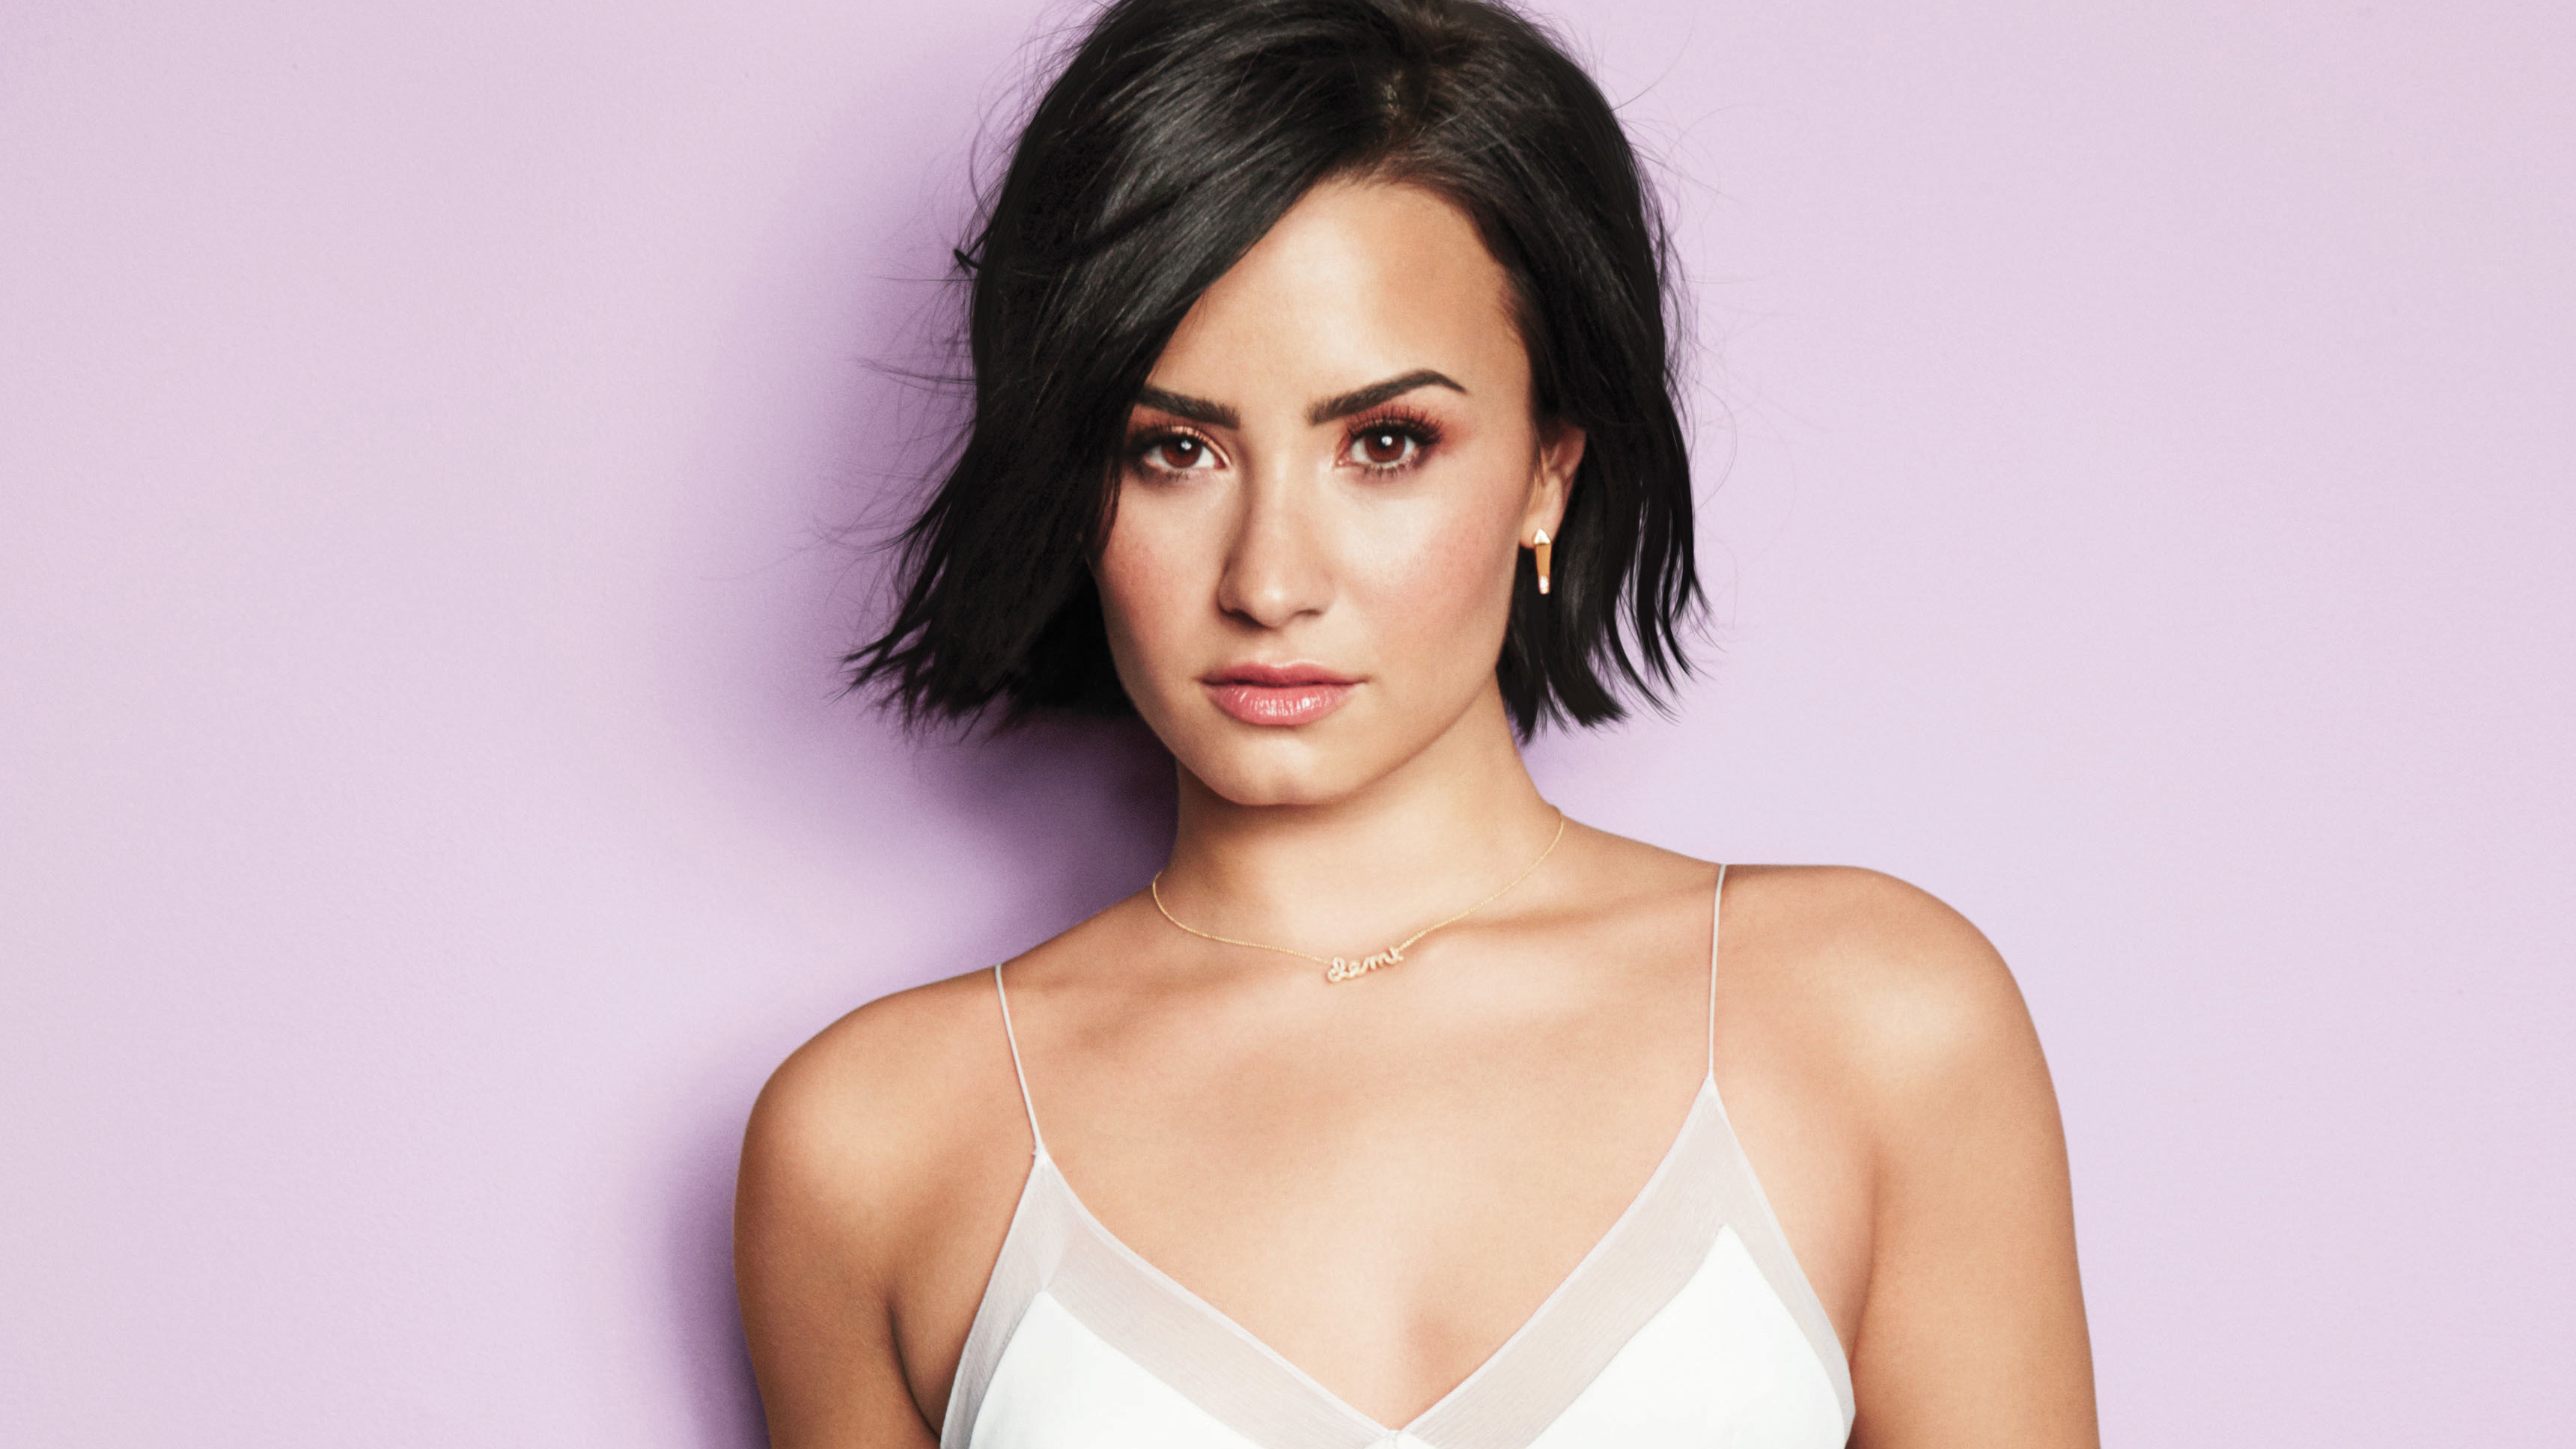 Demi lovato cosmopolitan hd music k wallpapers images backgrounds photos and pictures